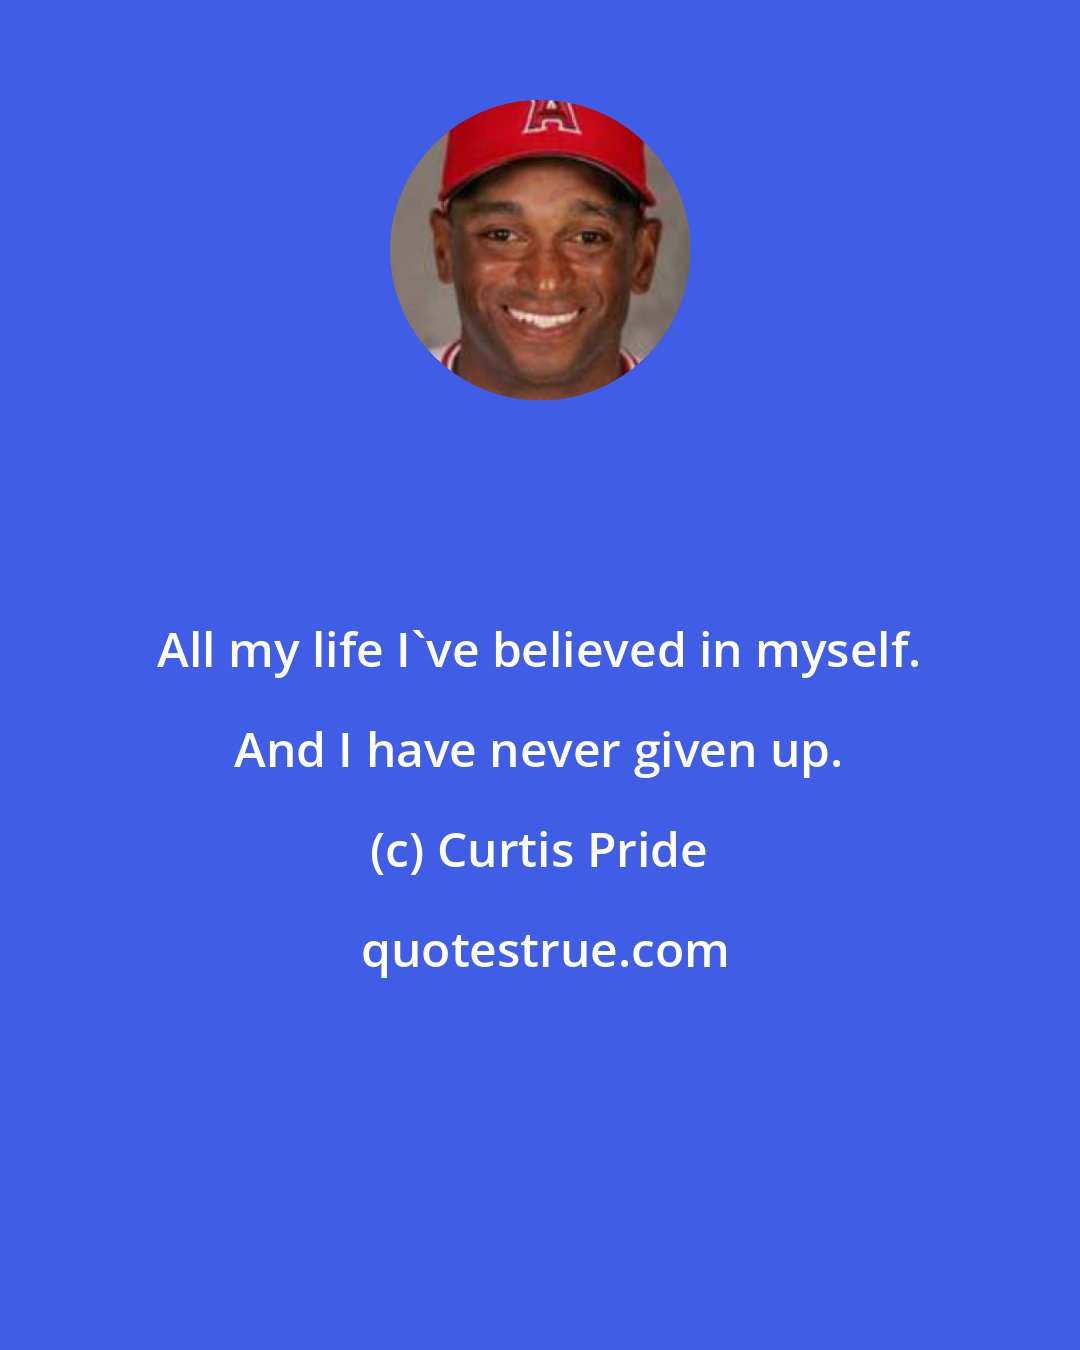 Curtis Pride: All my life I've believed in myself. And I have never given up.